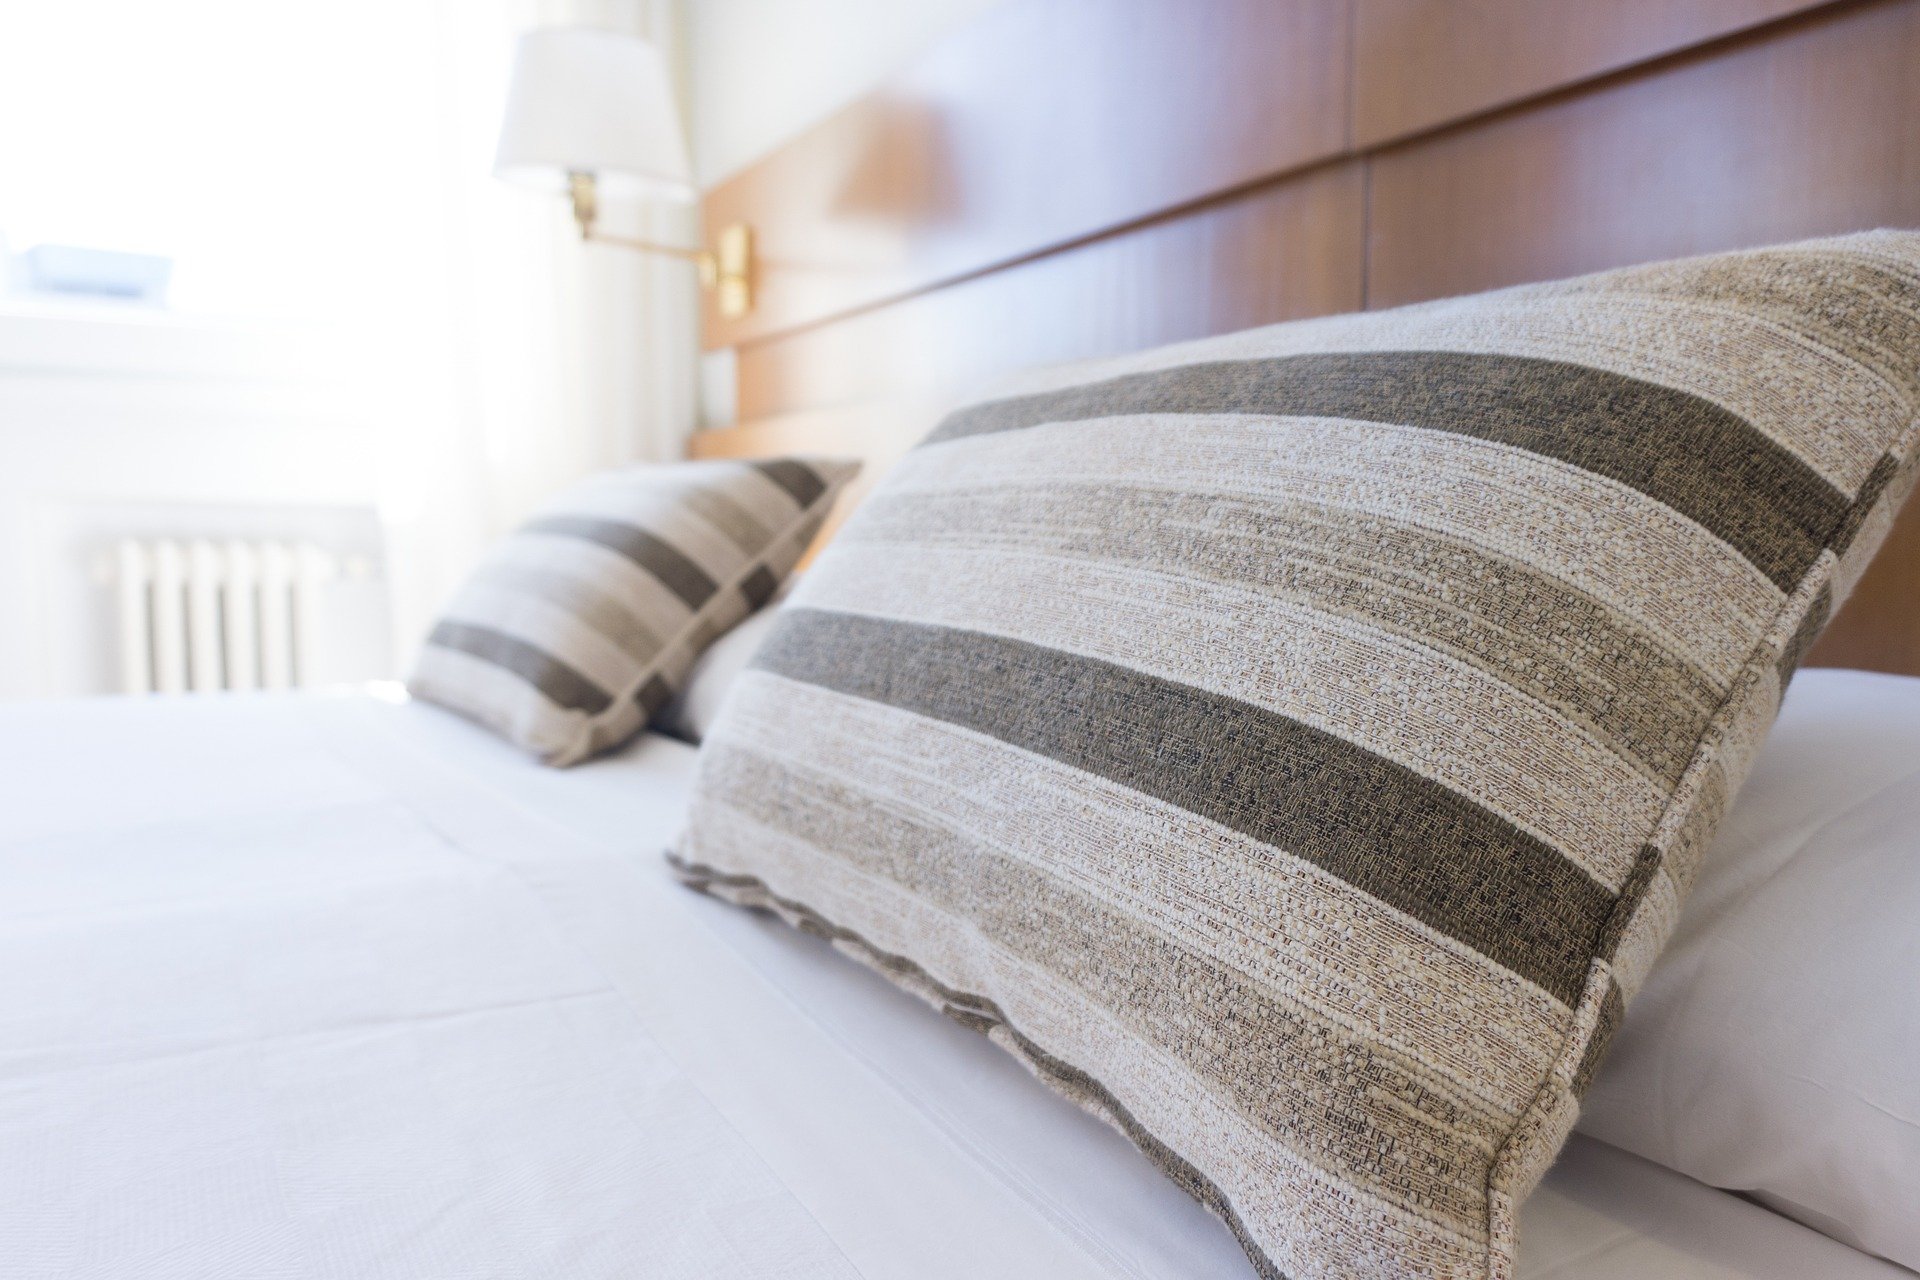 5 Tidy Benefits of Good Bed Hygiene